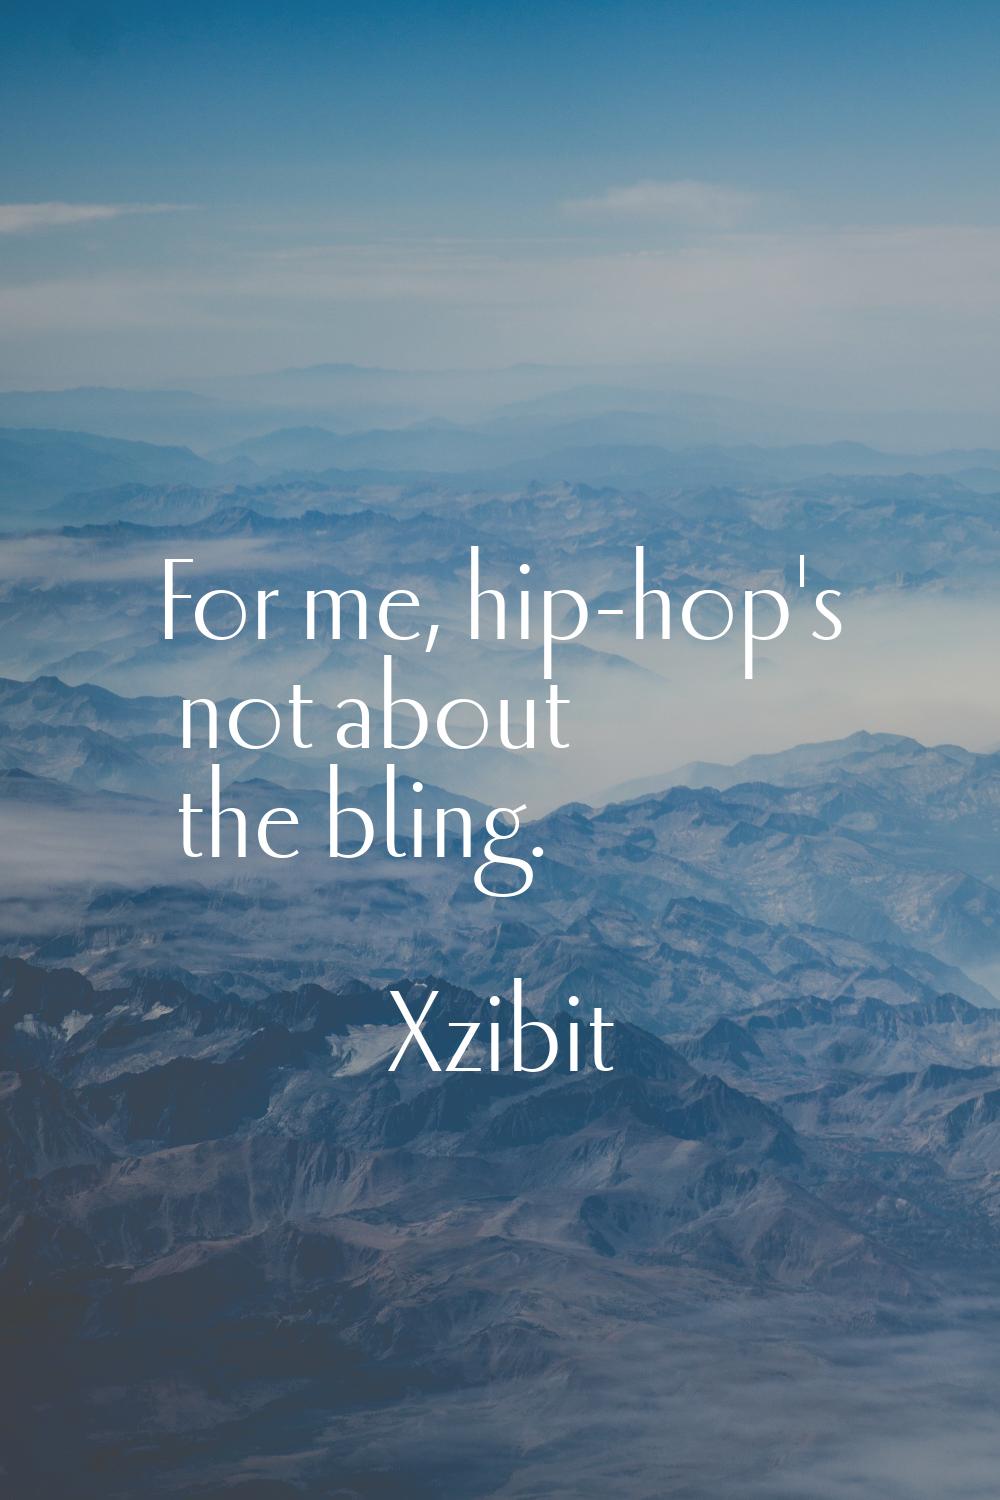 For me, hip-hop's not about the bling.